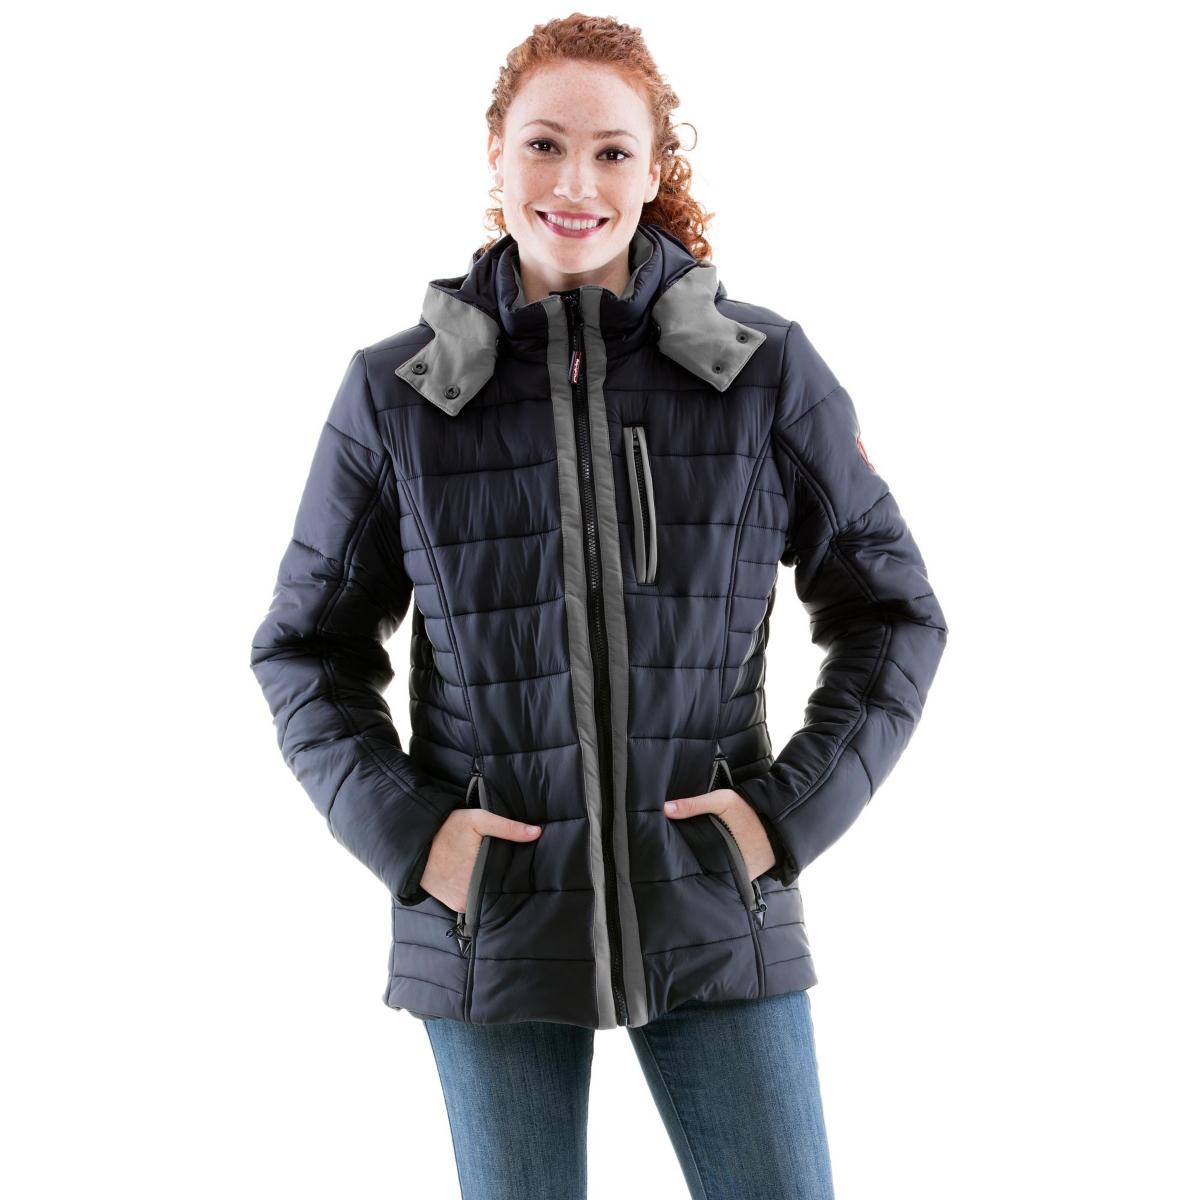 Women's Pure-Soft Lightweight Insulated Jacket with Removable Hood - Black